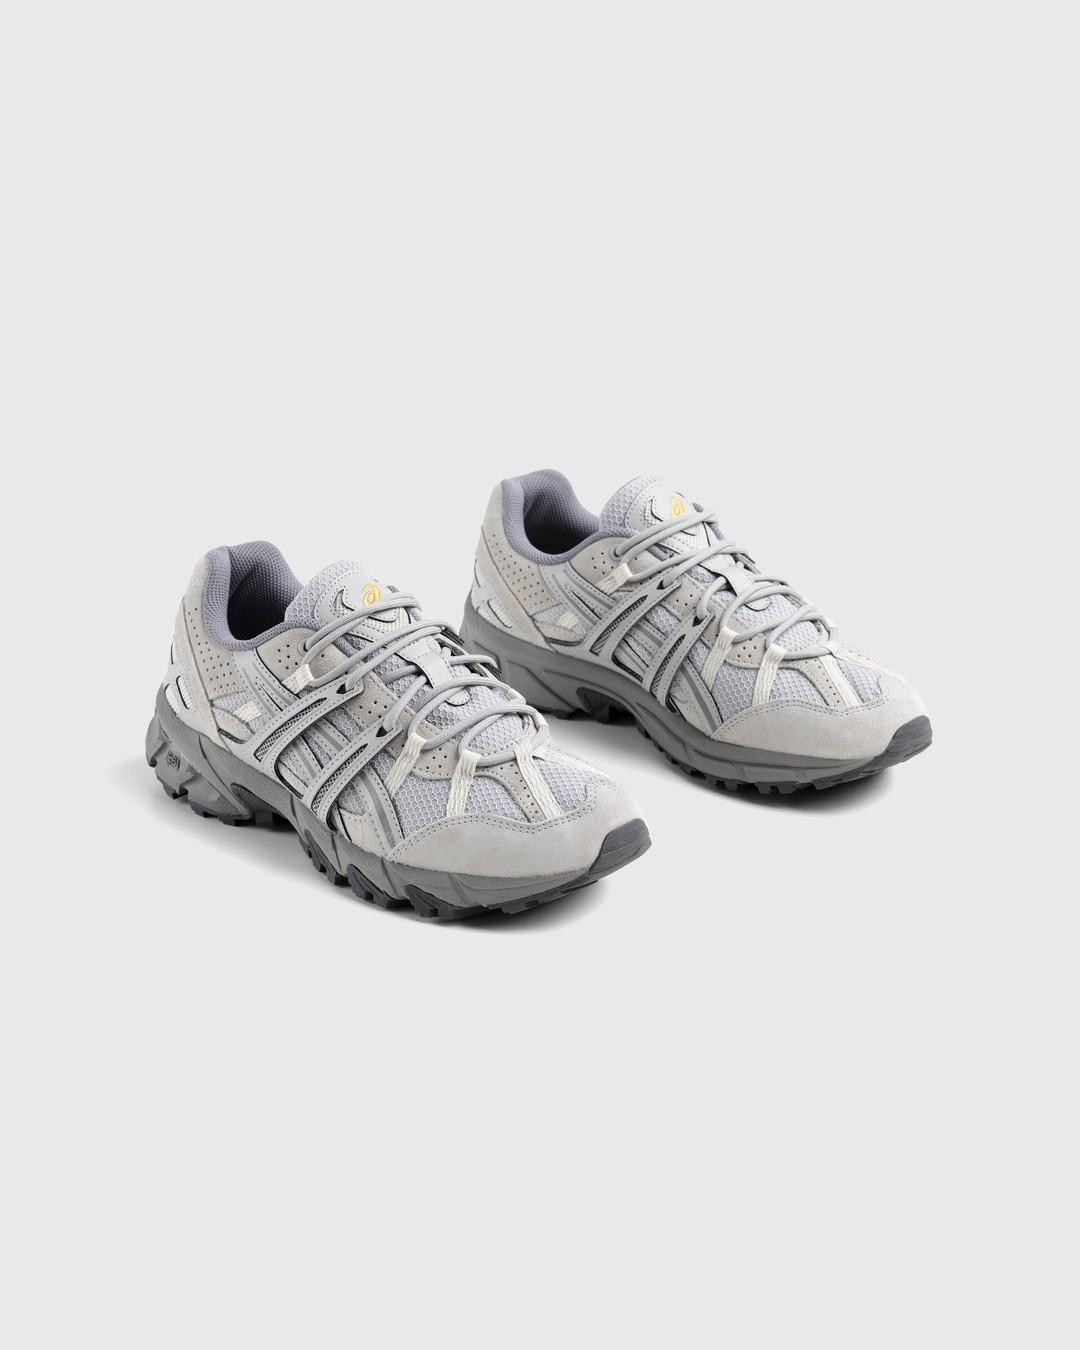 asics – Gel-Sonoma 15-50 Oyster Grey/Clay Grey - Sneakers - Grey - Image 4